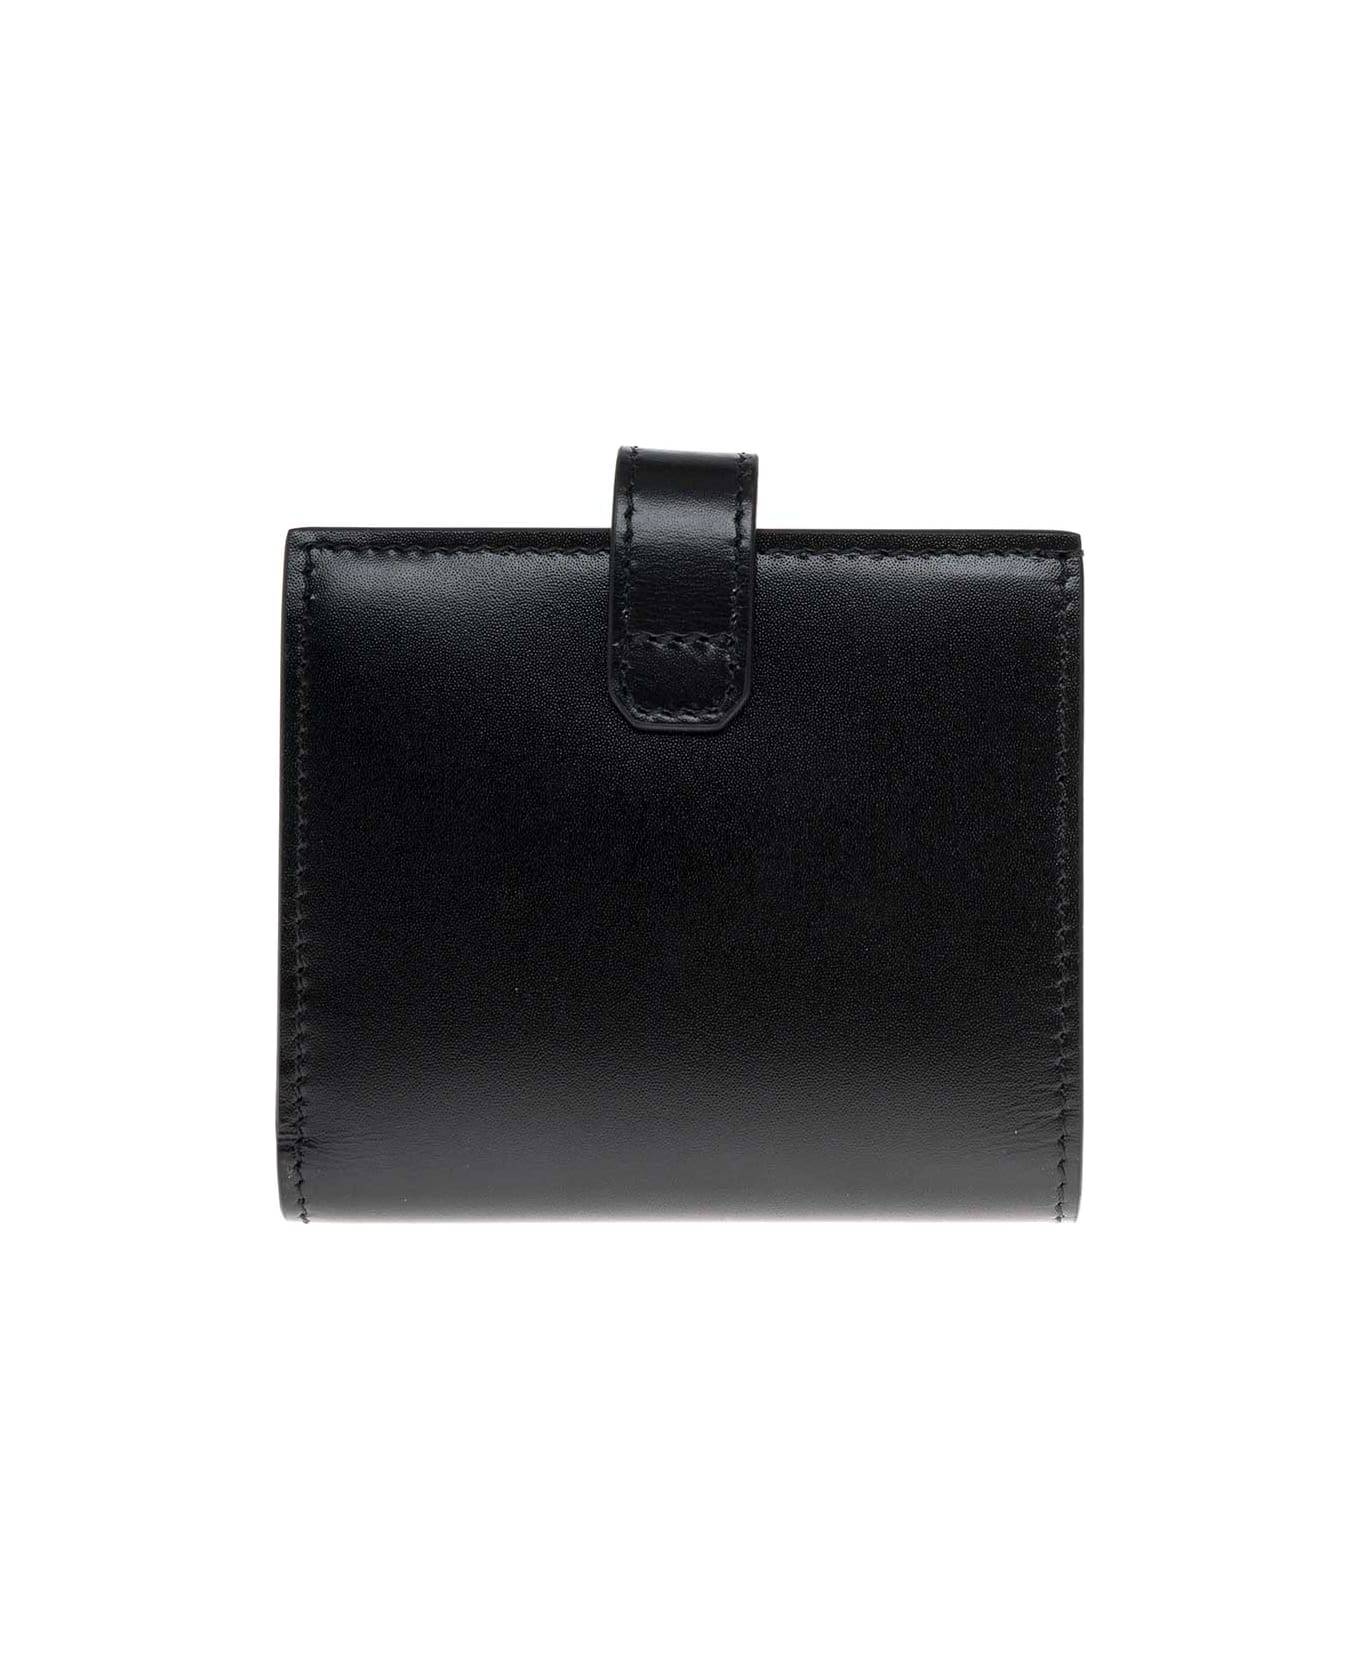 Givenchy Woman's Bifold Black Leather Wallet With 4g Logo - Black